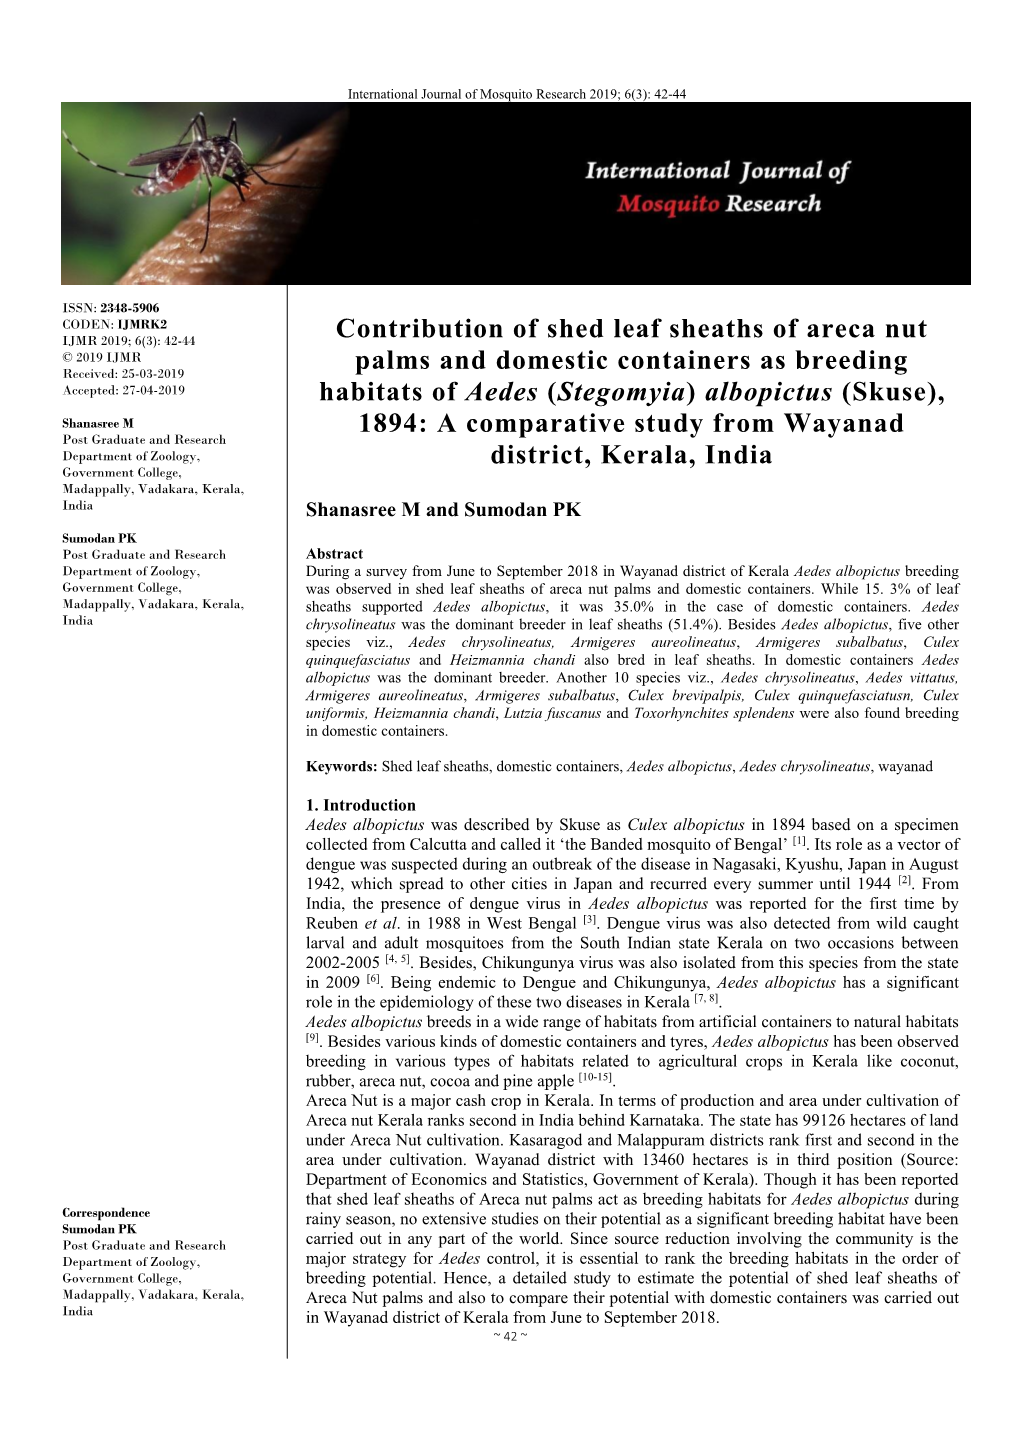 Contribution of Shed Leaf Sheaths of Areca Nut Palms and Domestic